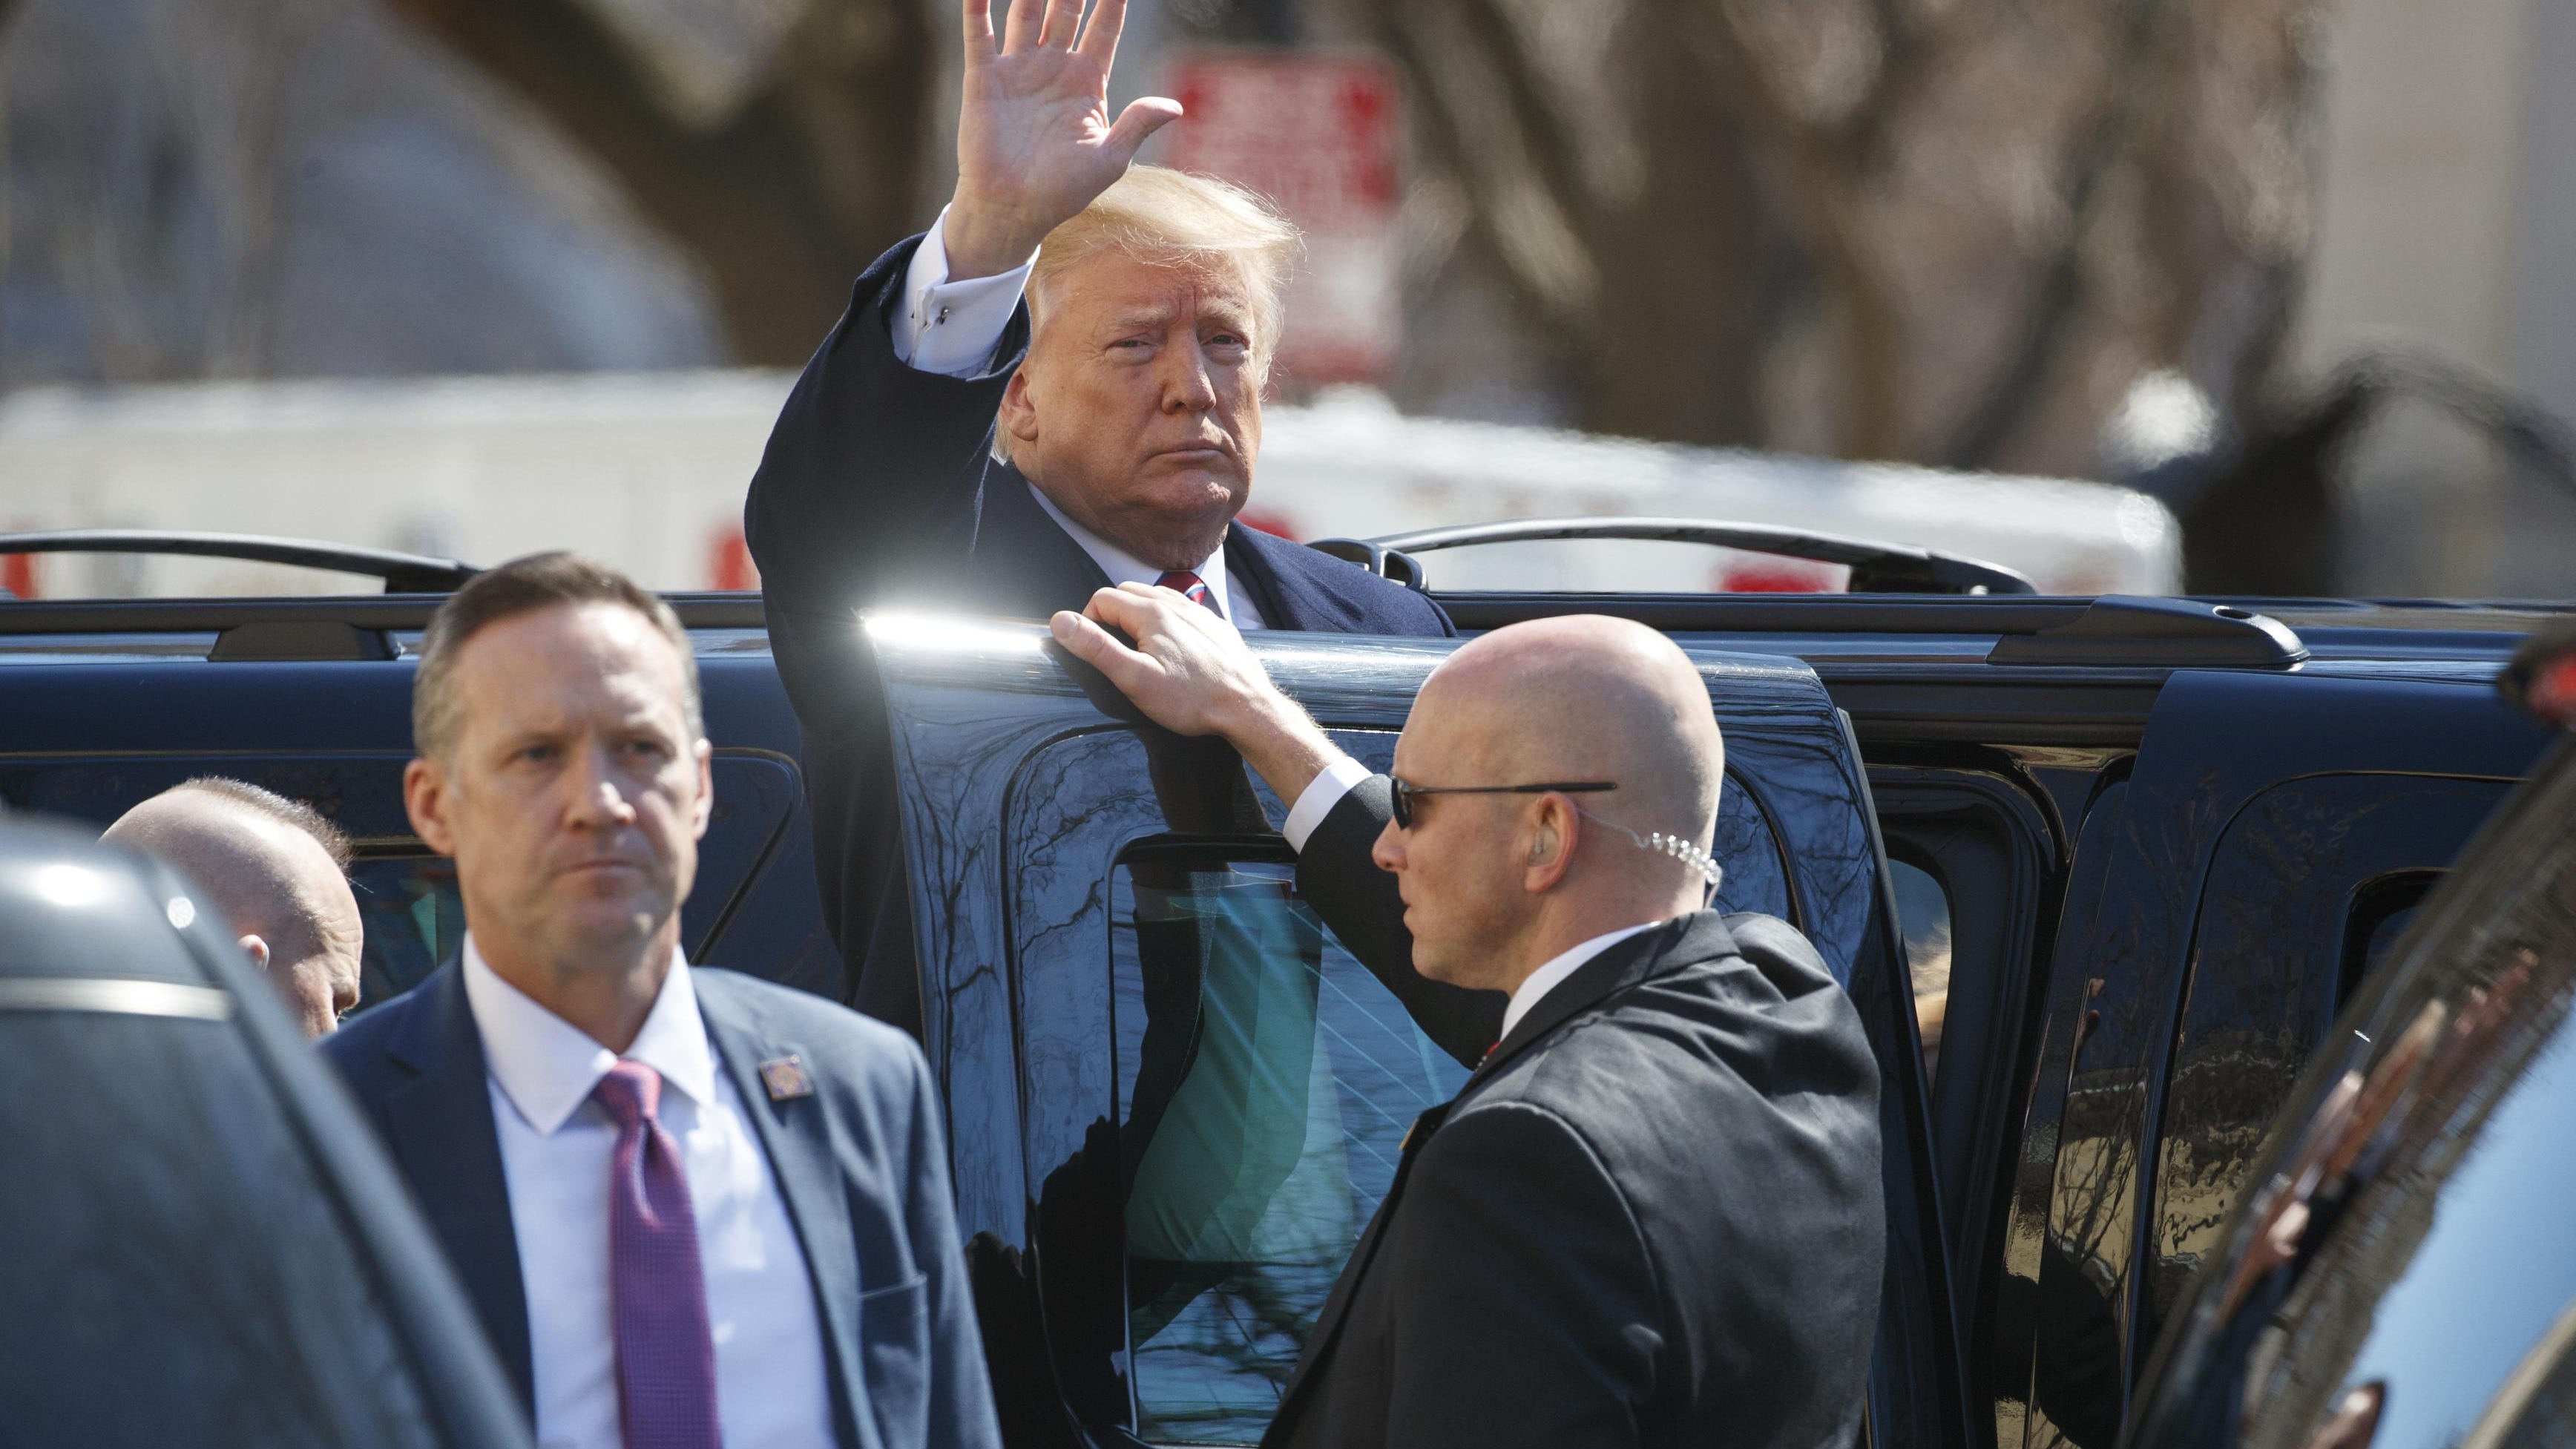 Trump tweeted Sunday that the UAW’s local president “ought to get his act together and produce.” The president, who previously has called on GM to reopen the plant, added: “I want action on Lordstown fast.”